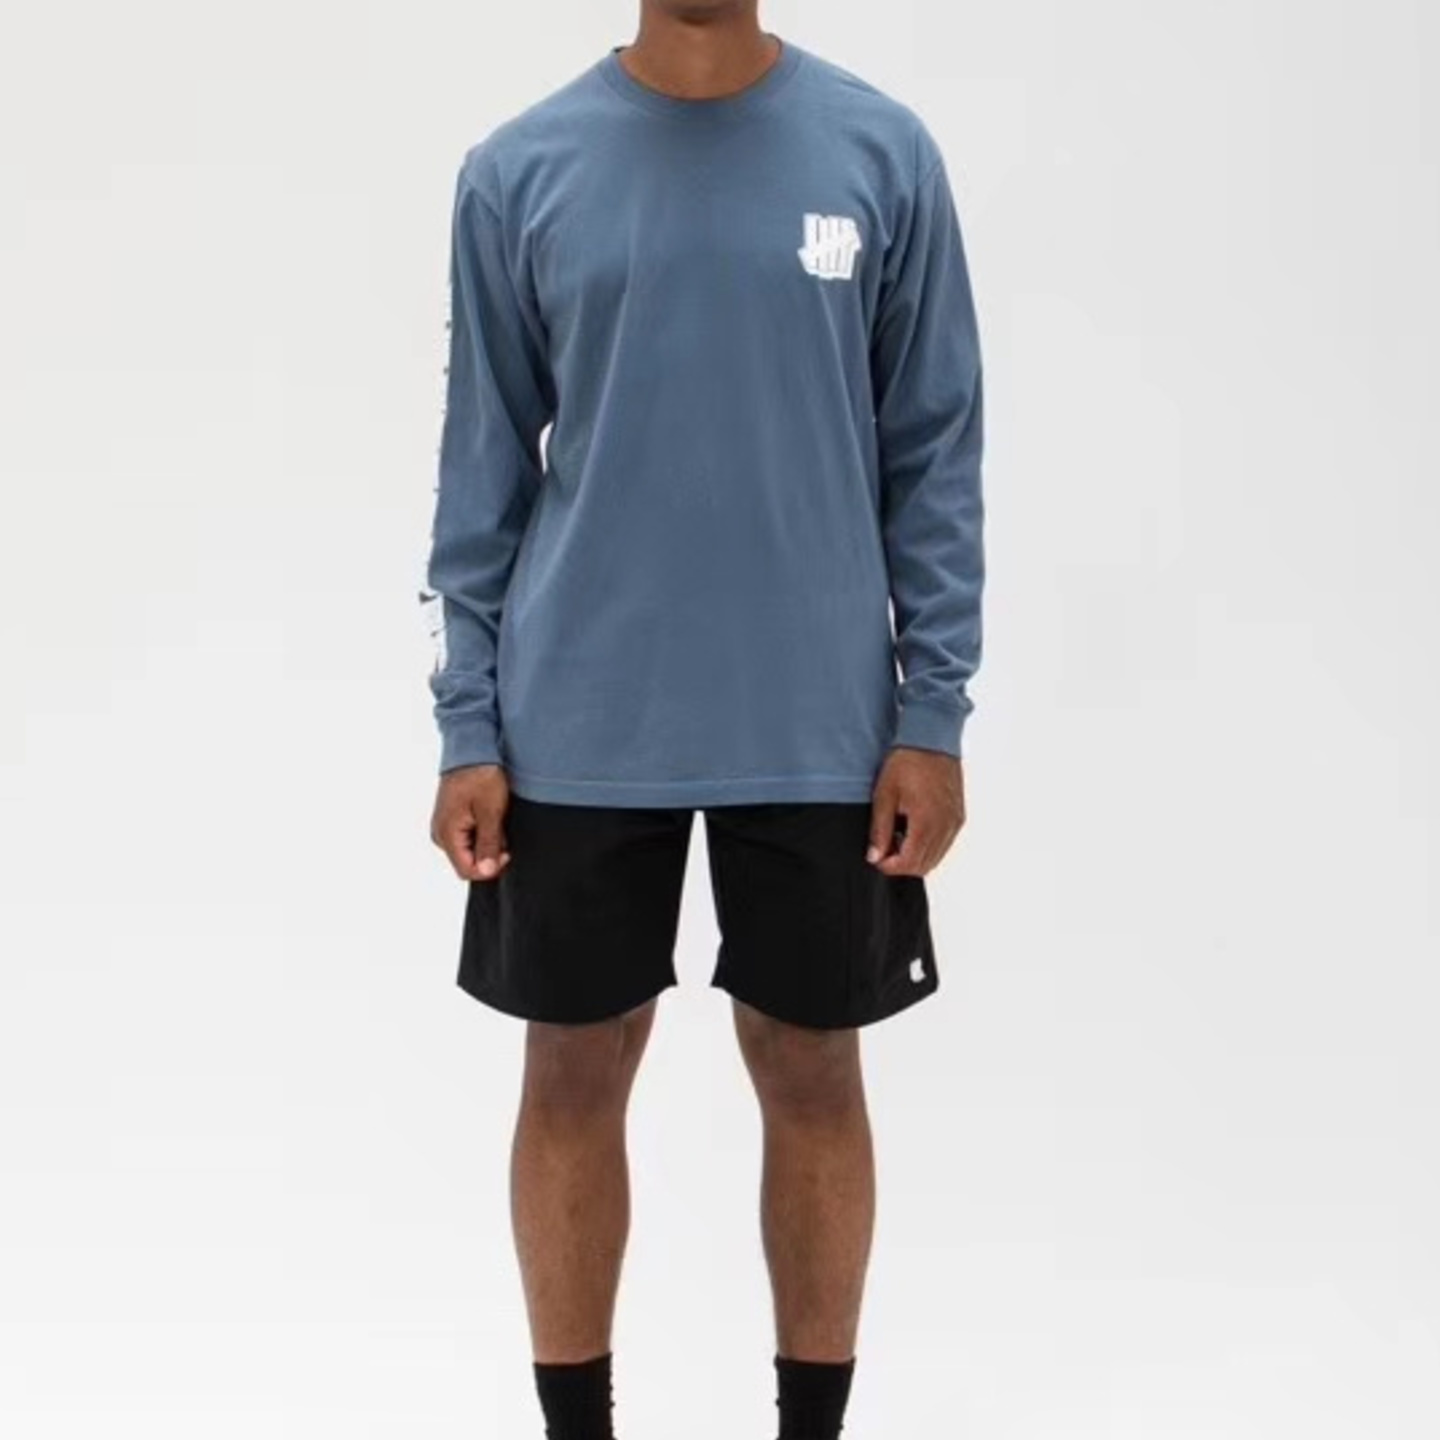 Undefeated Play Dirty Long Sleeve T-Shirt